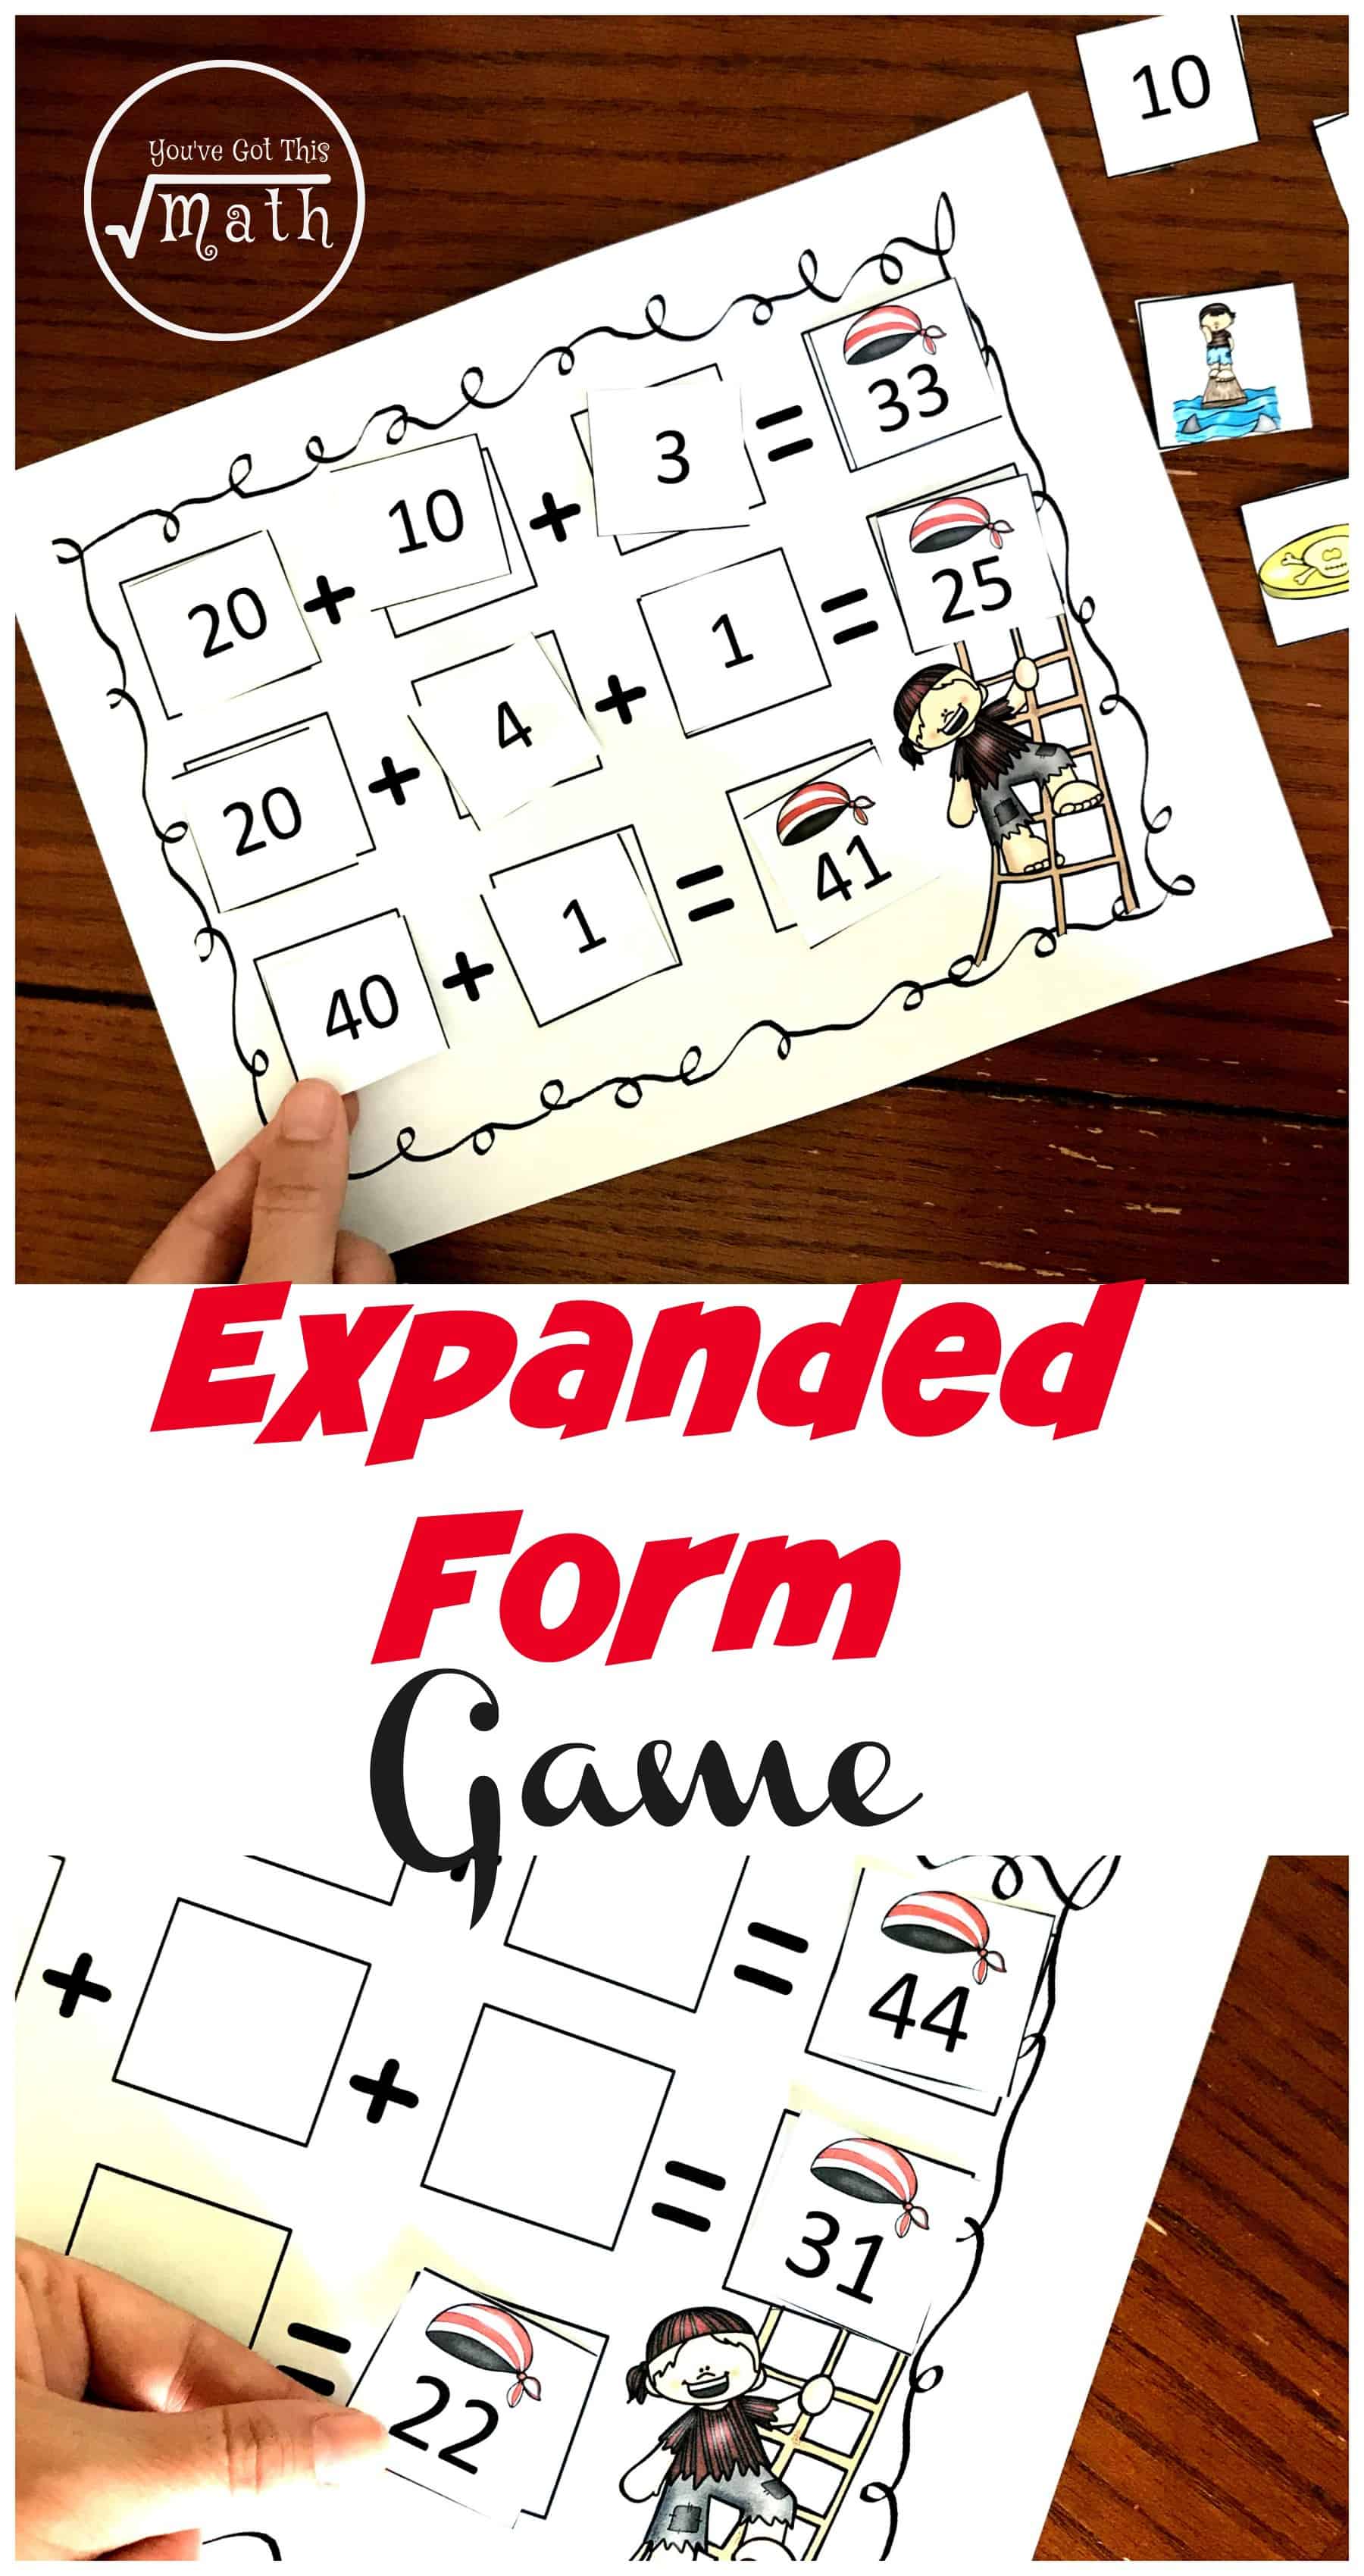 Expanded form game with a pirate theme with cards with numbers on them.